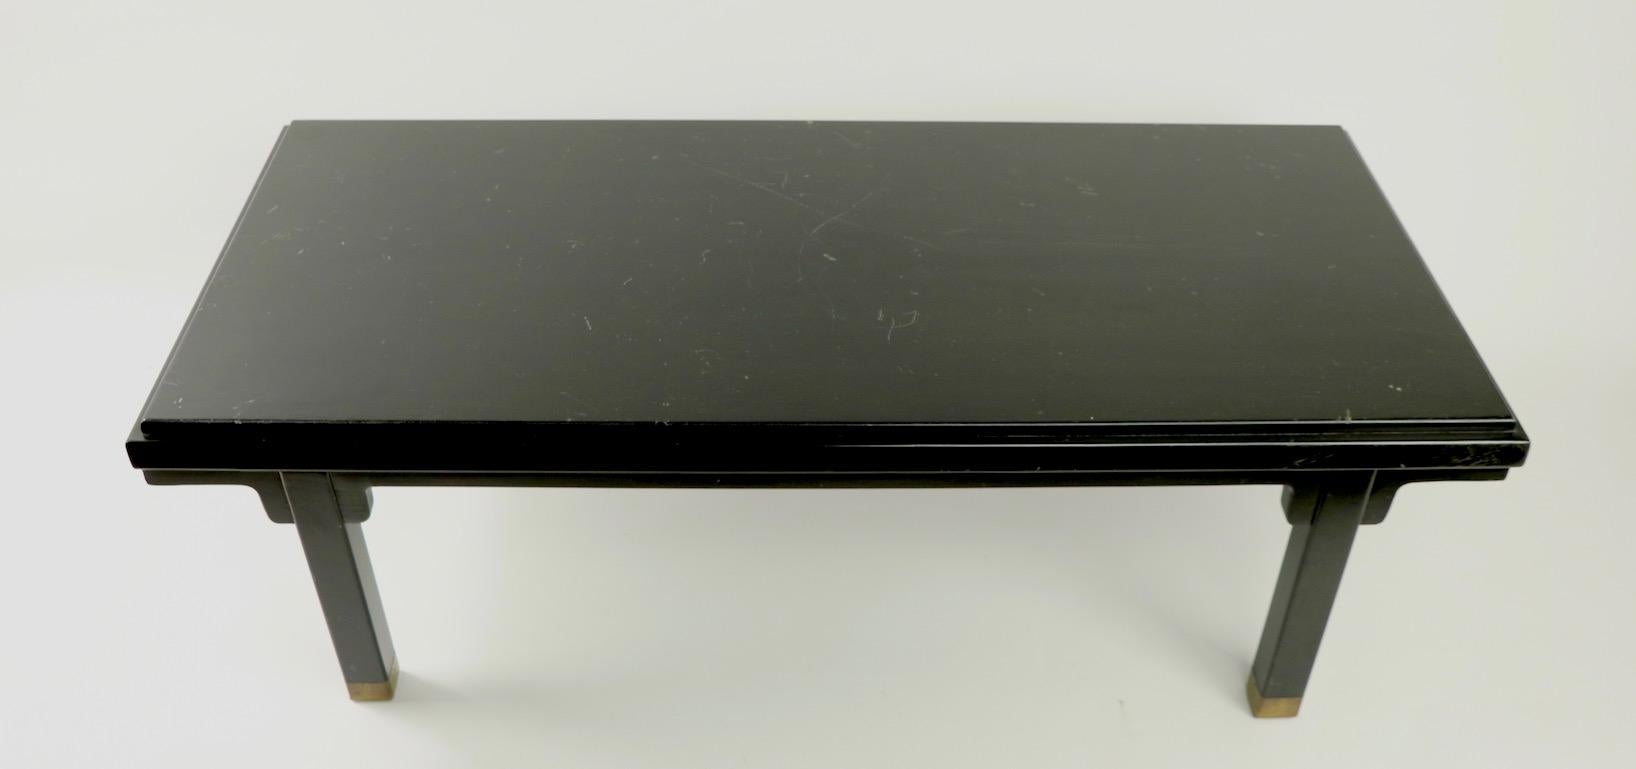 Diminutive and graphic Asia Modern coffee table having all-over black finish and brass CAP feet. The finish shows cosmetic wear, light scratching and signs of age and use. Manufacture attributed to Baker Furniture, unsigned.